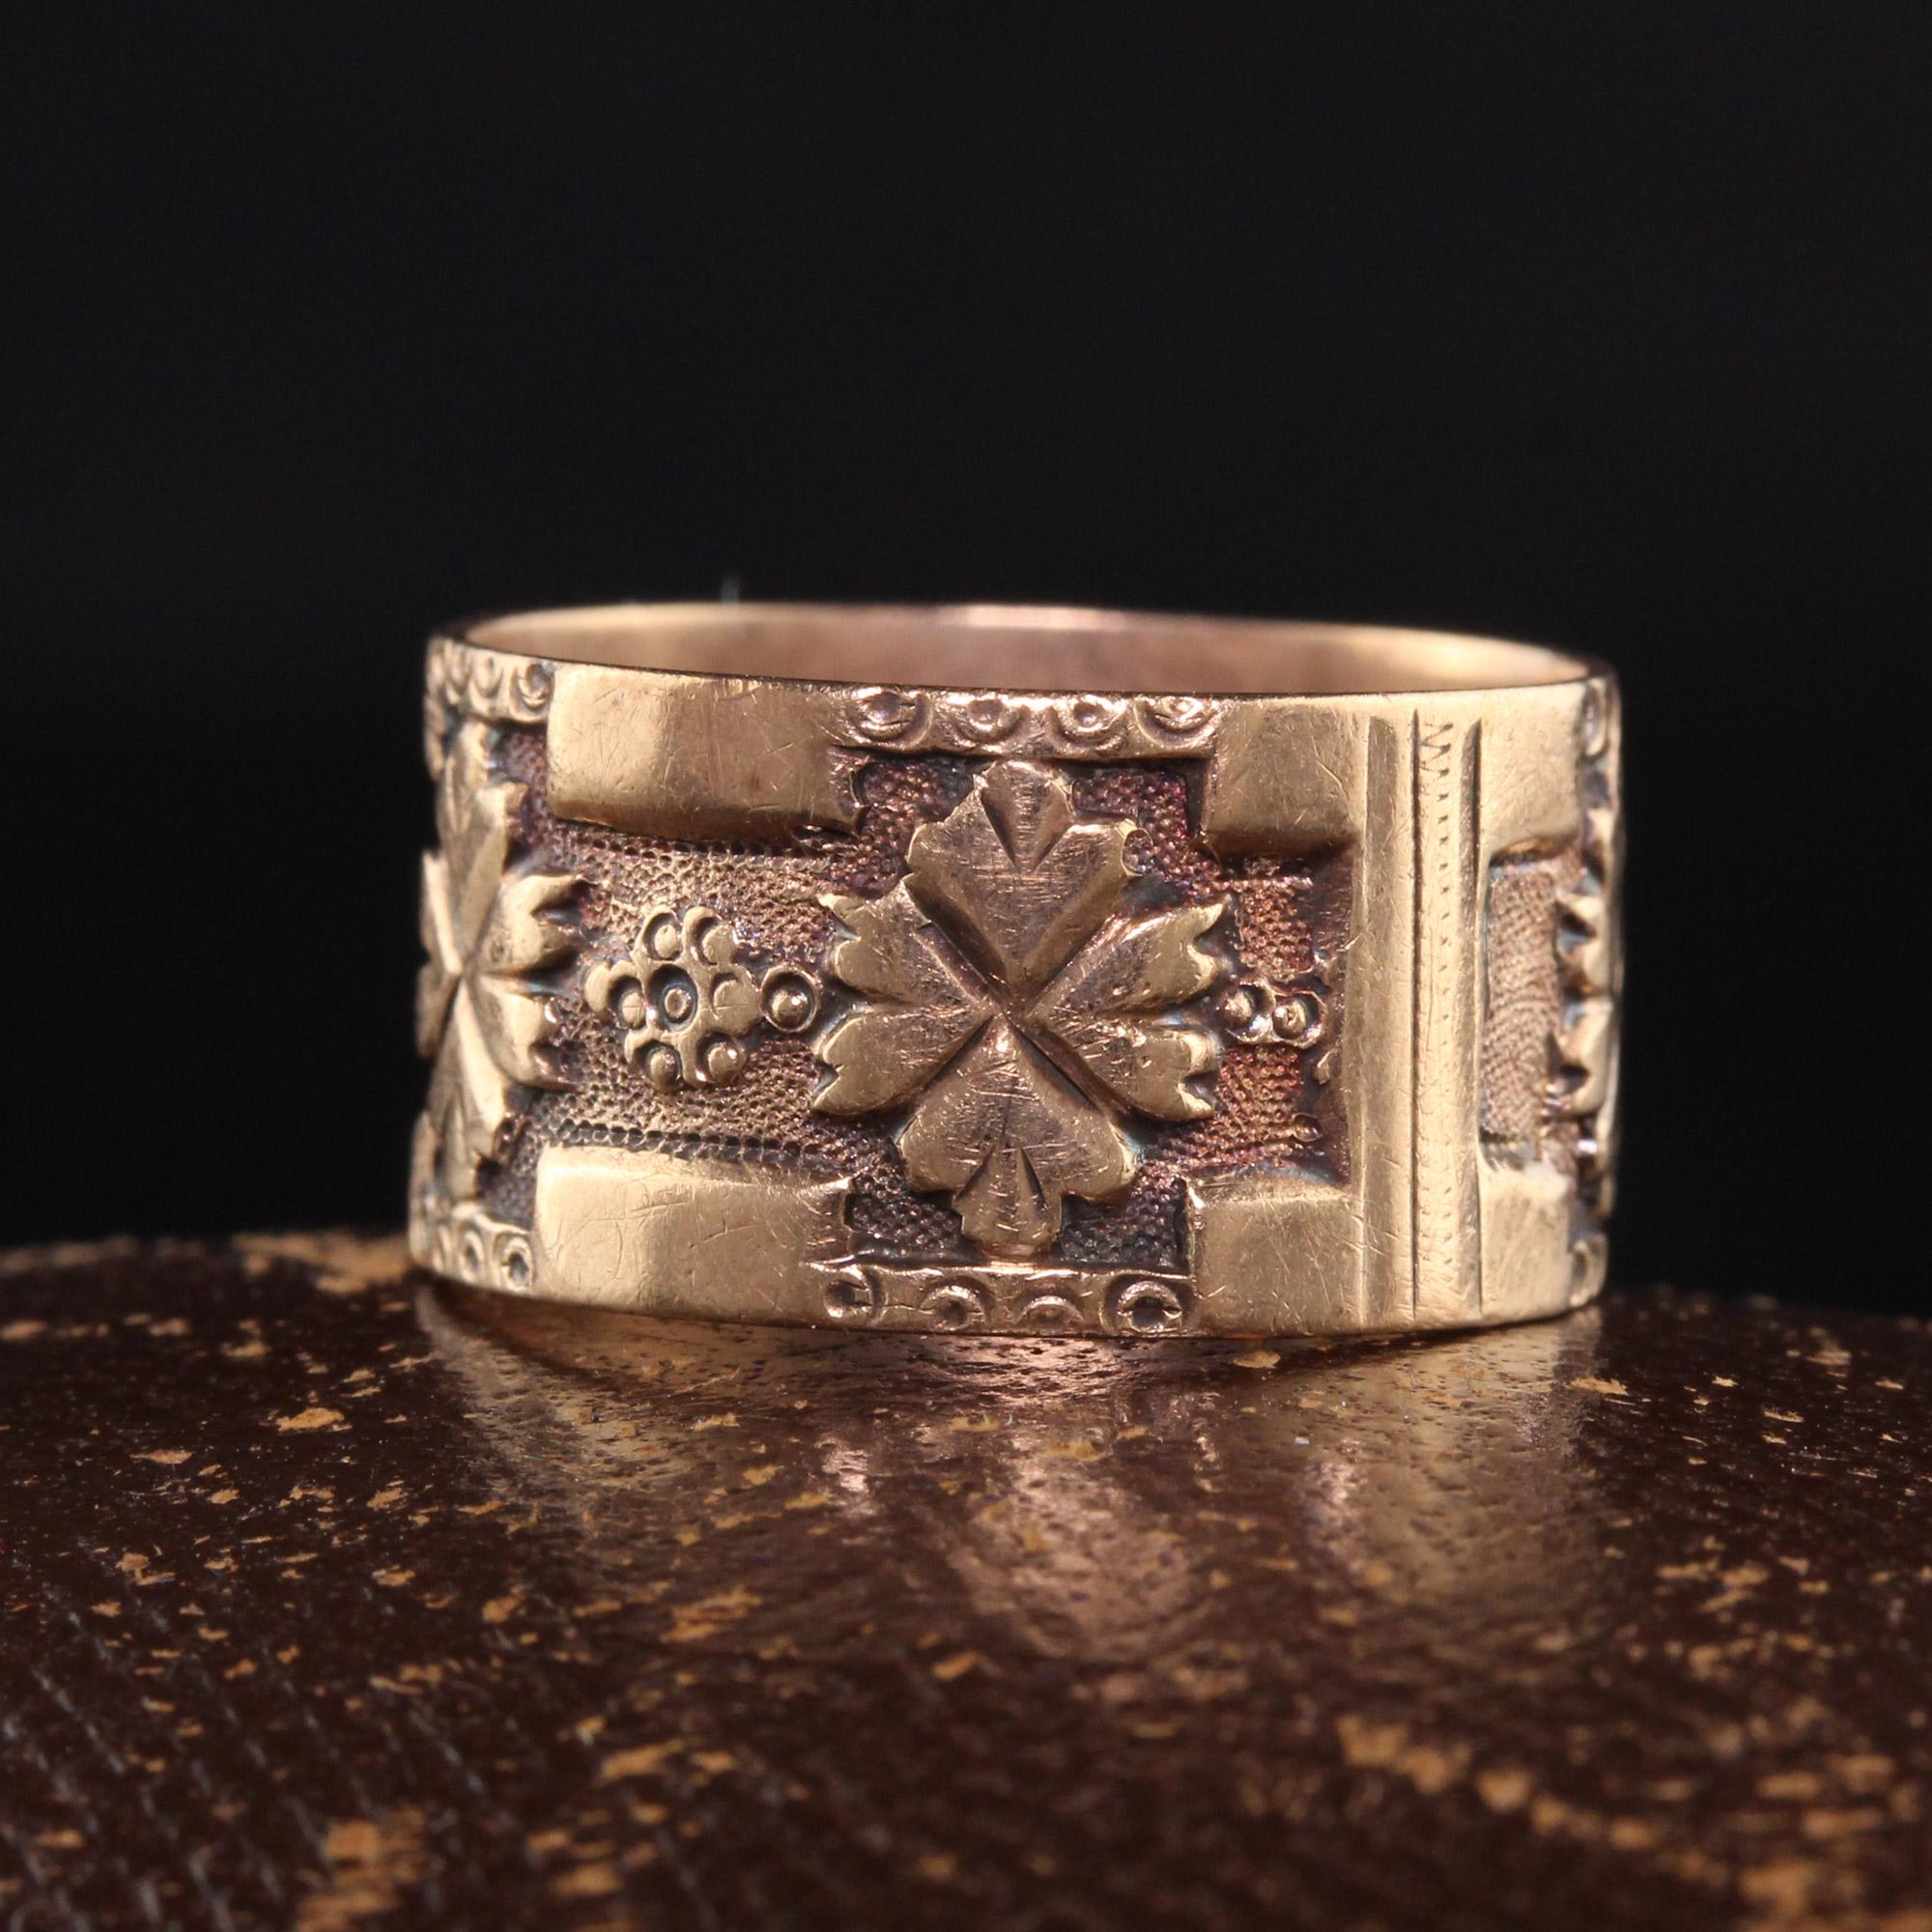 Beautiful Antique Victorian 14K Rose Gold Engraved Floral Wide Wedding Band. This beautiful wedding band is engraved with floral designs and is in great condition.

Item #R1002

Metal: 14K Rose Gold

Weight: 3.2 Grams

Ring Size: 6

Measurements: